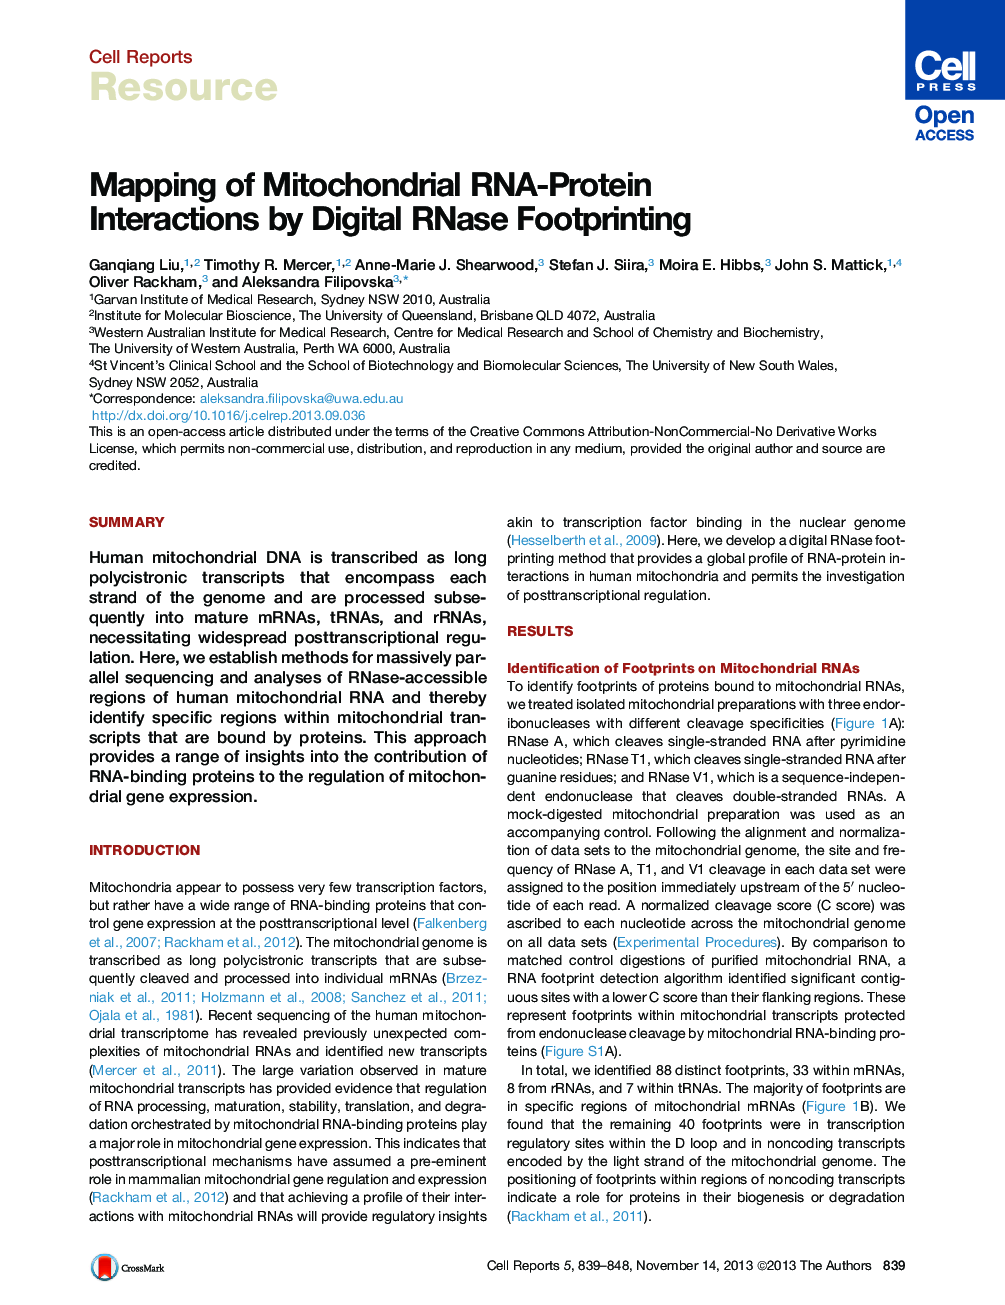 Mapping of Mitochondrial RNA-Protein Interactions by Digital RNase Footprinting 